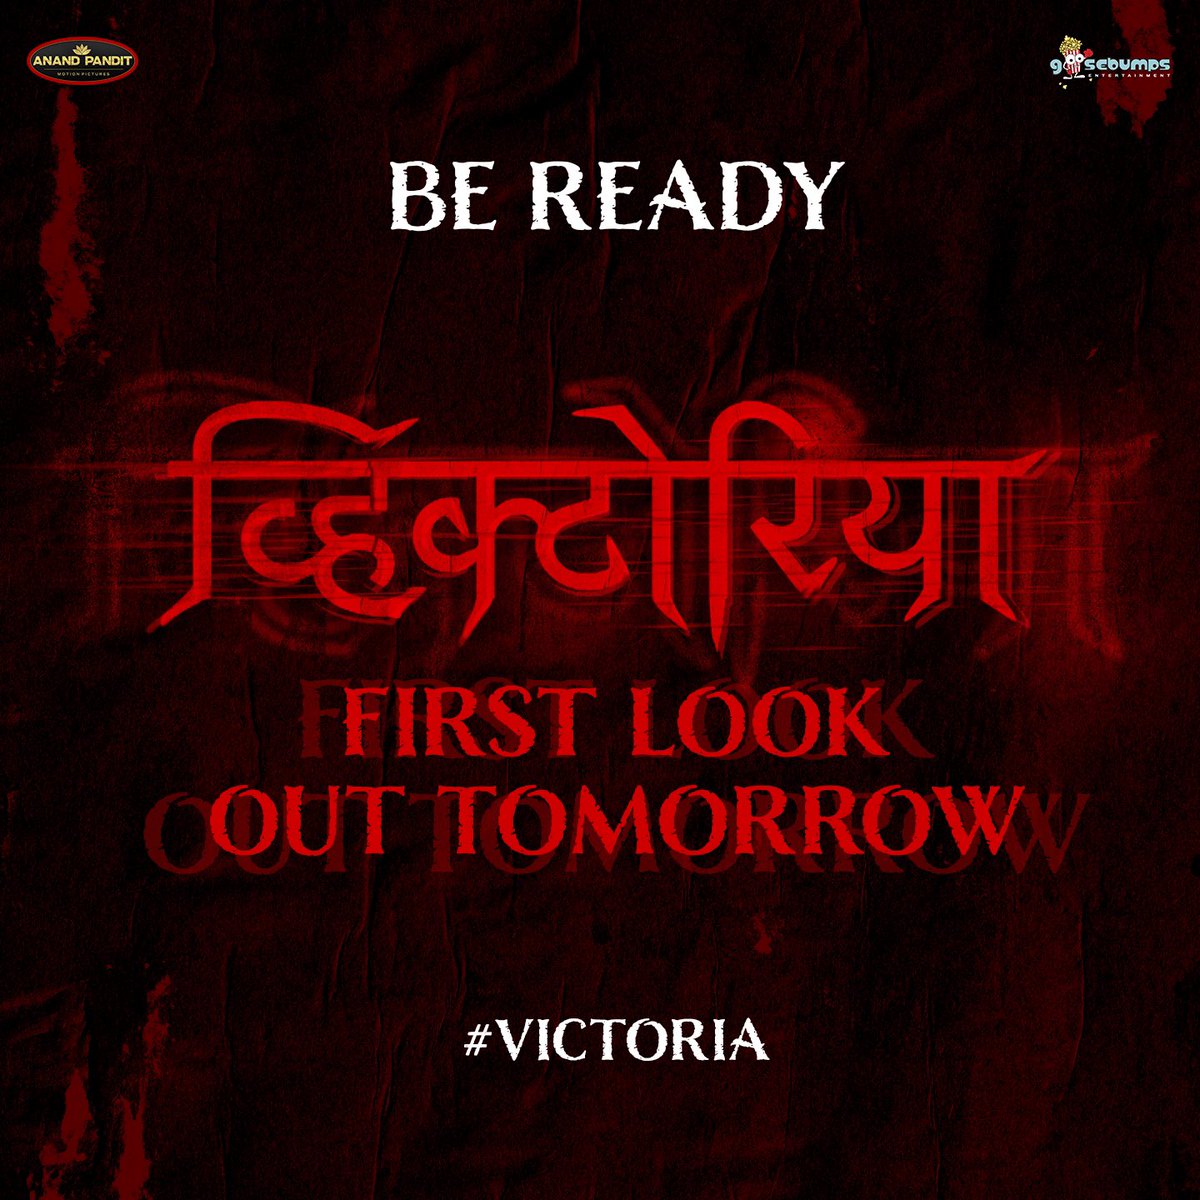 First Glimpse of #Victoria Out Tomorrow

Produced by #AnandPanditMotionPictures & #GoosebumpsEntertainment 

Directed by - #JeetAshok & #VirajasKulkarni 

Producers - #AnandPandit #RoopaPandit & #PushkarJog